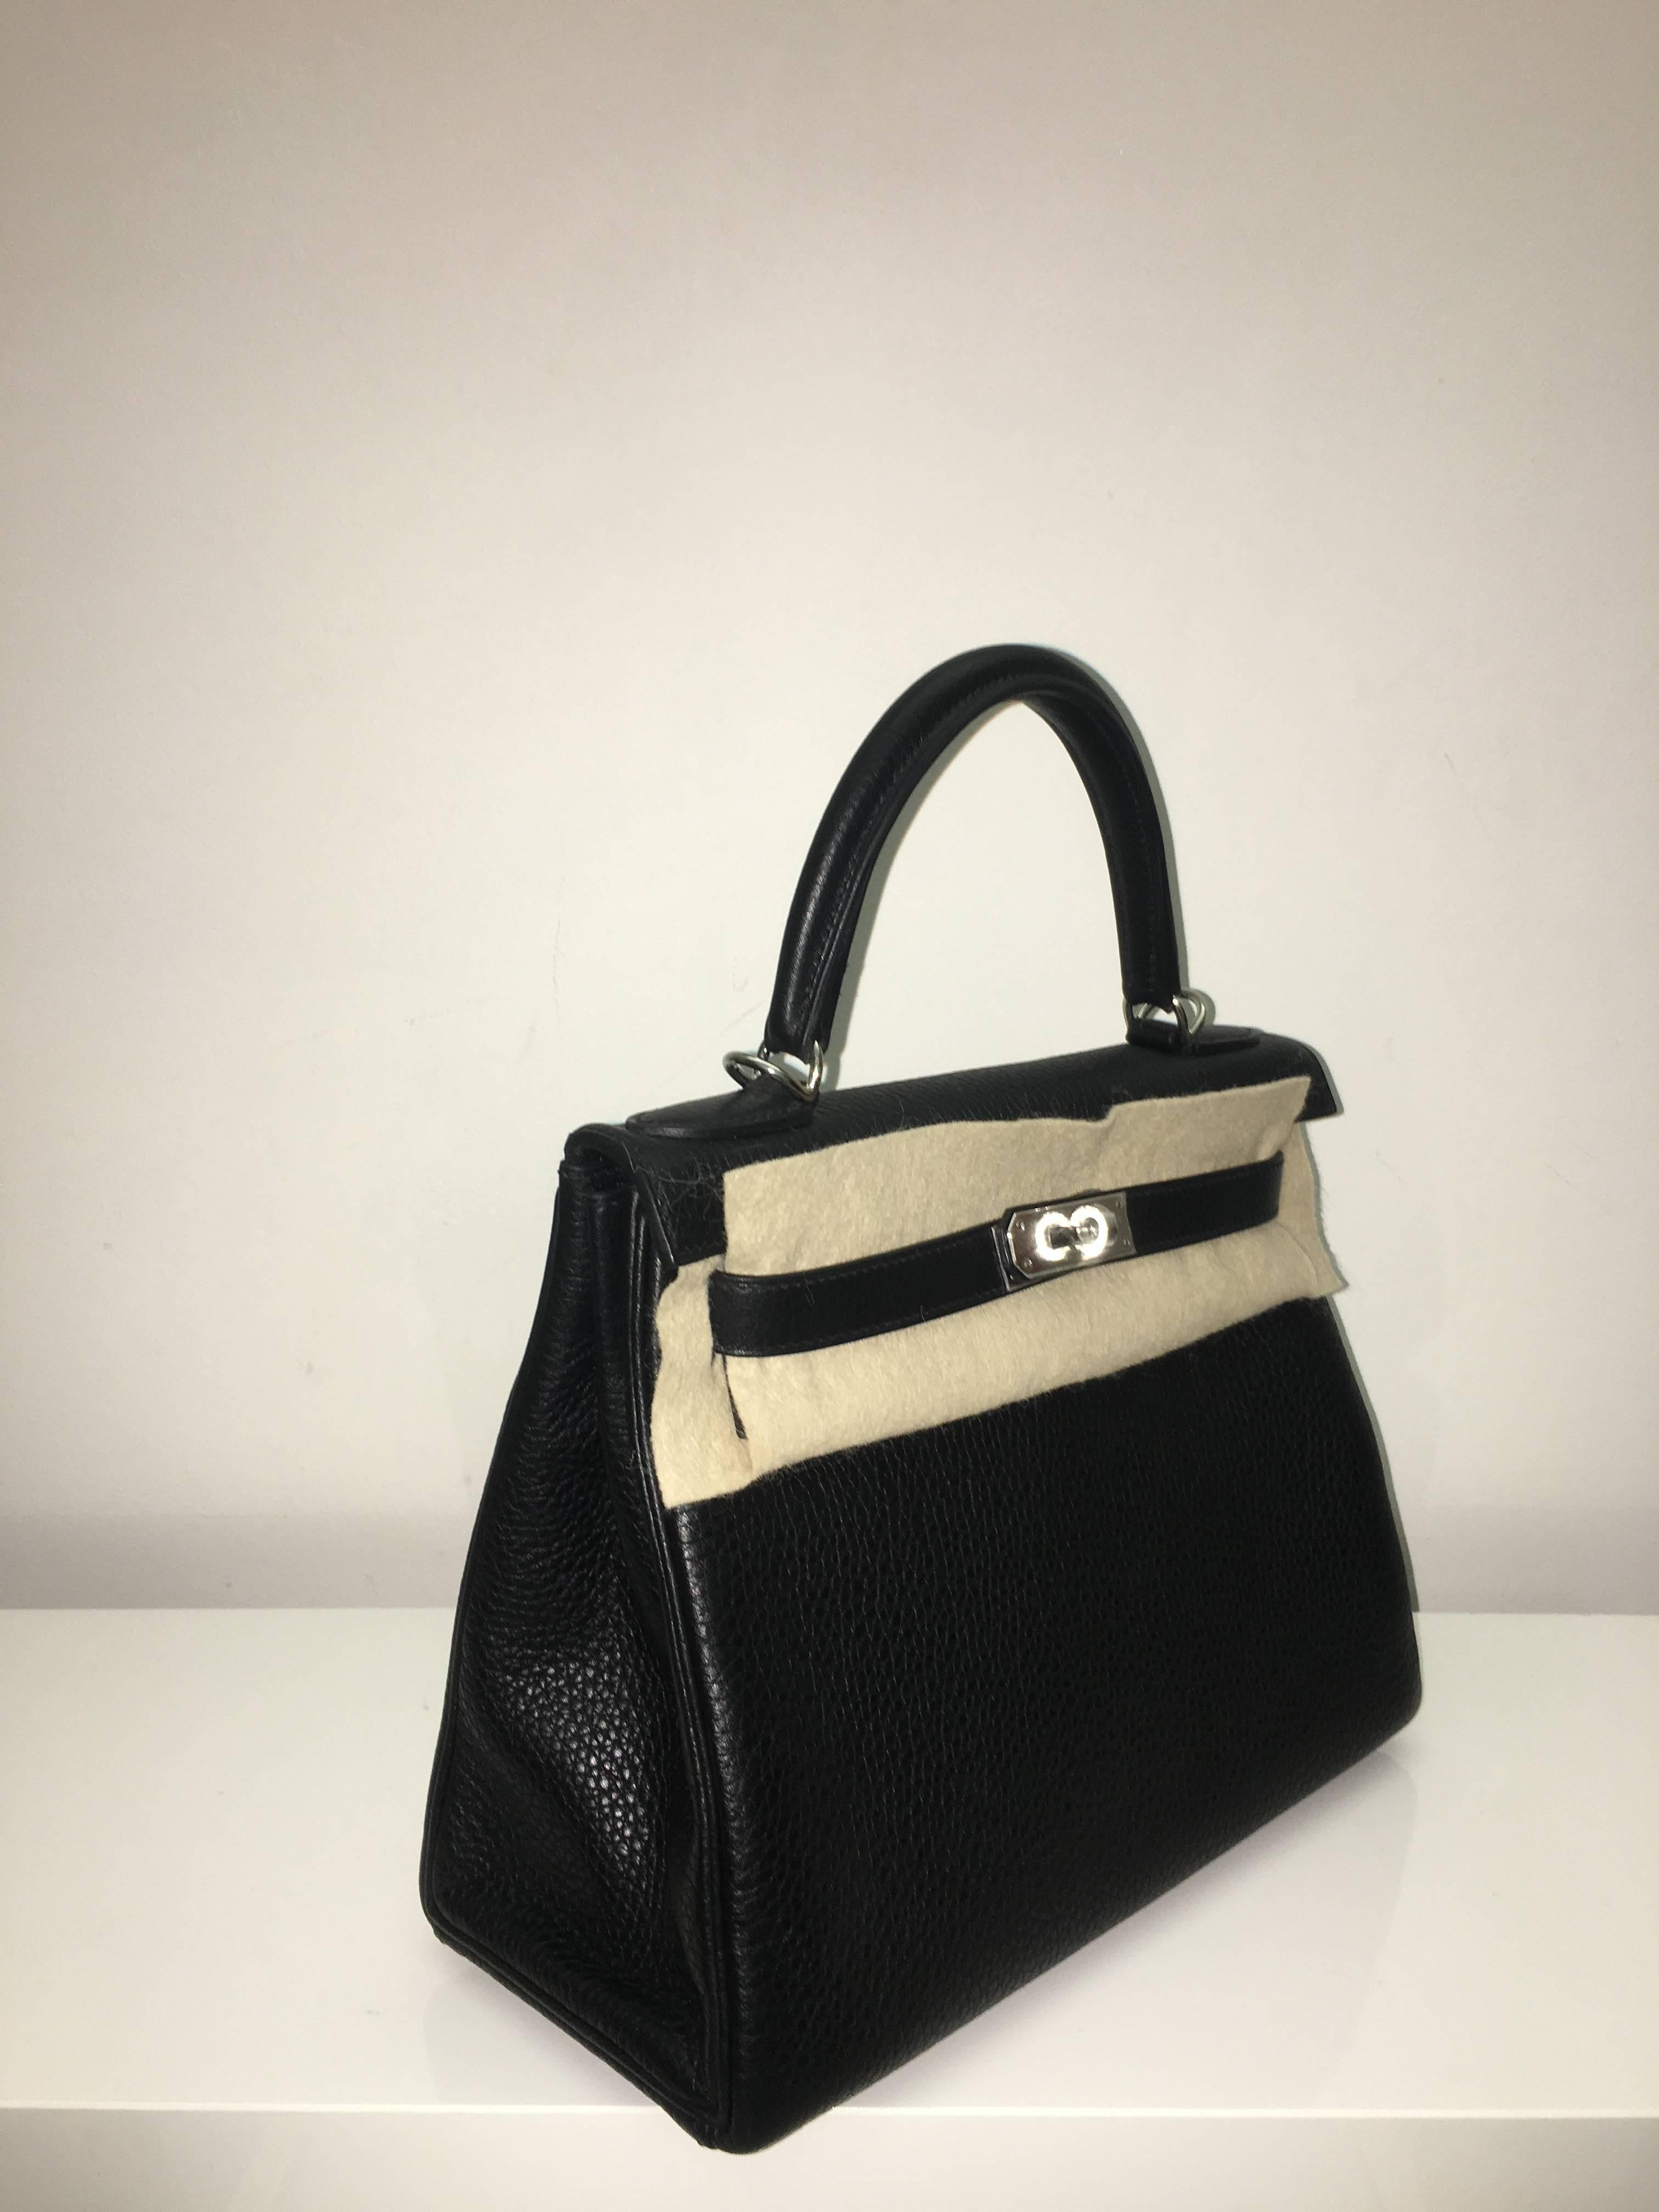 Hermes 
Kelly Size 28
Togo Leather 
Colour Black (Noir)
Silver (Palladium) Hardware
store fresh, comes with receipt and full set (dust bag, box...) 
Hydeparkfashion specializes in sourcing and delivering authentic luxury handbags, mainly Hermes, to